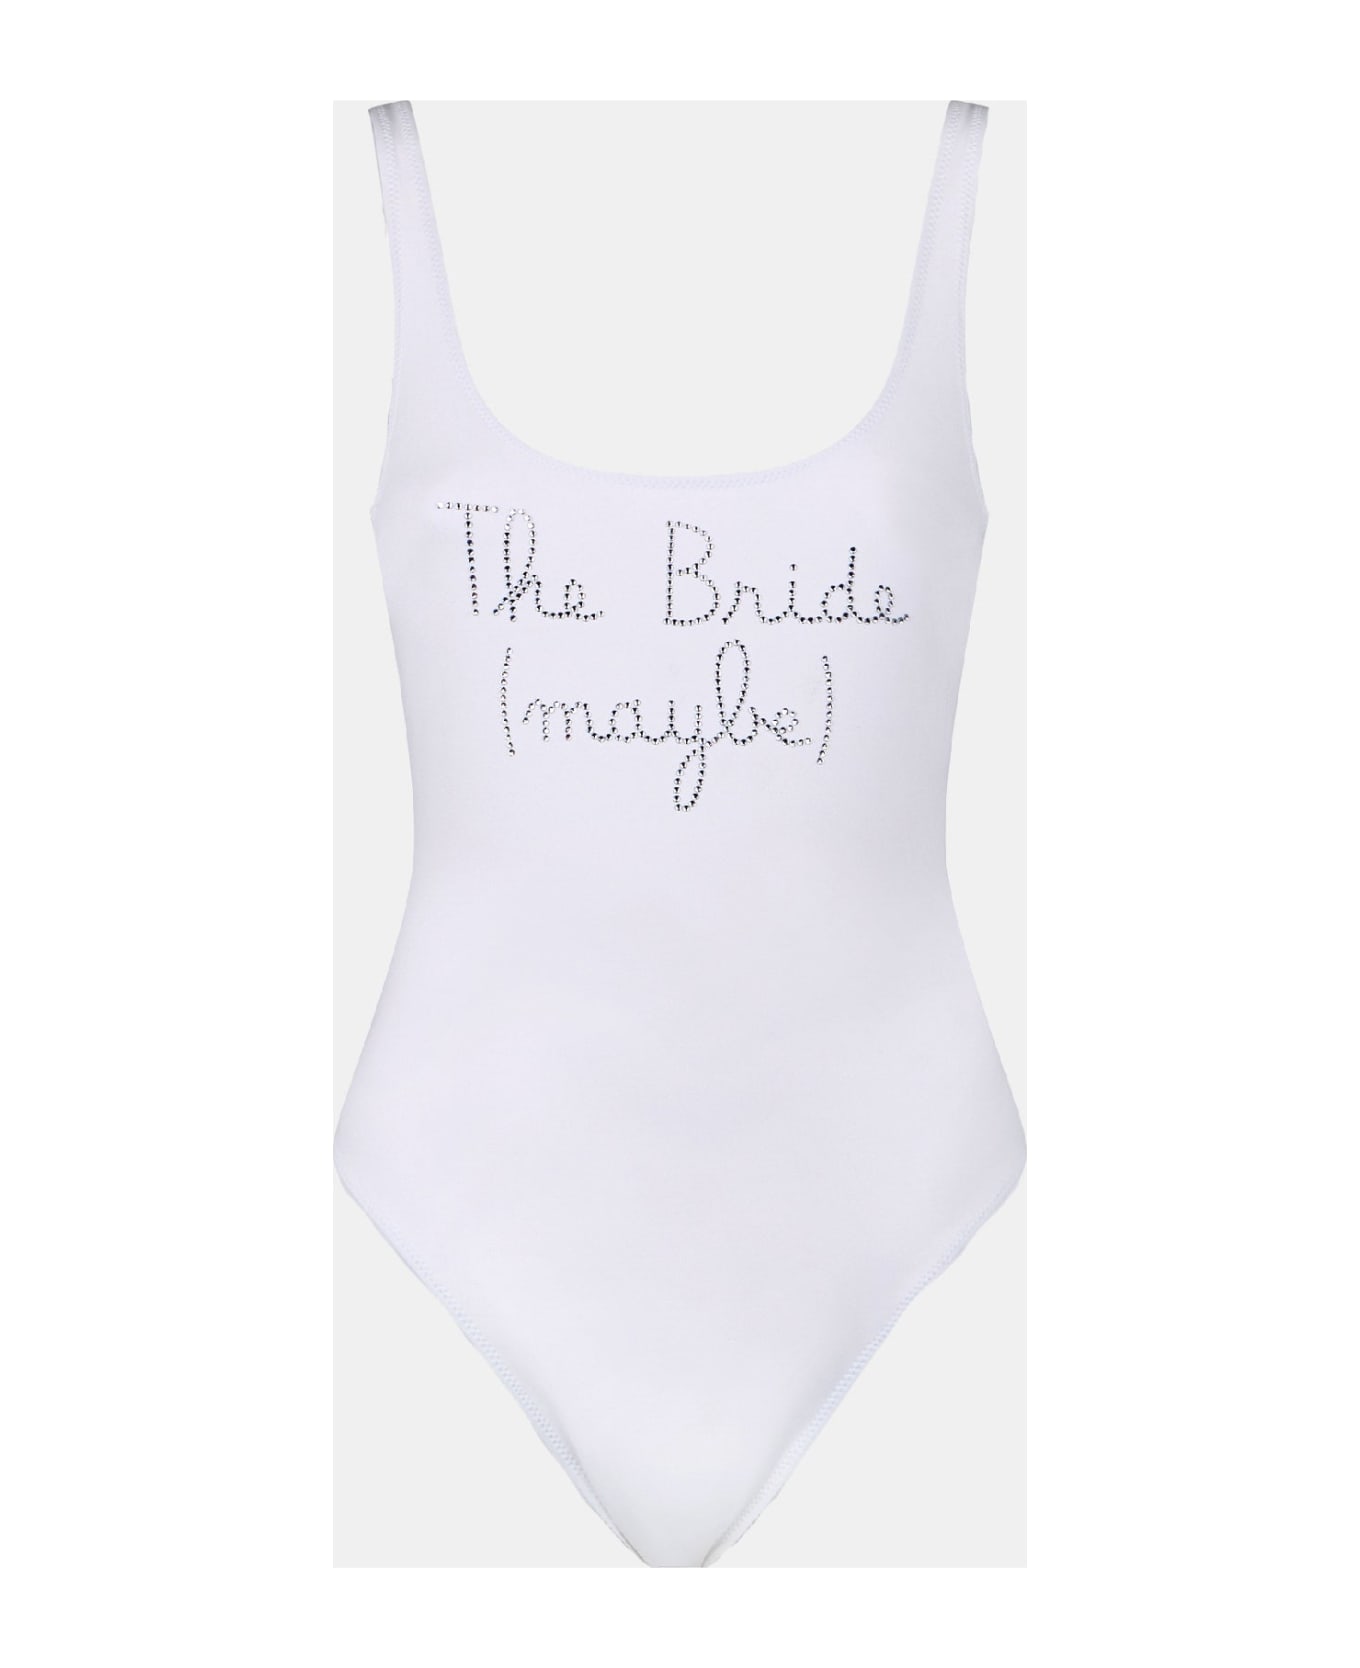 MC2 Saint Barth Woman One Piece Swimsuit With The Bride Maybe Rhinestone Embroidery - WHITE